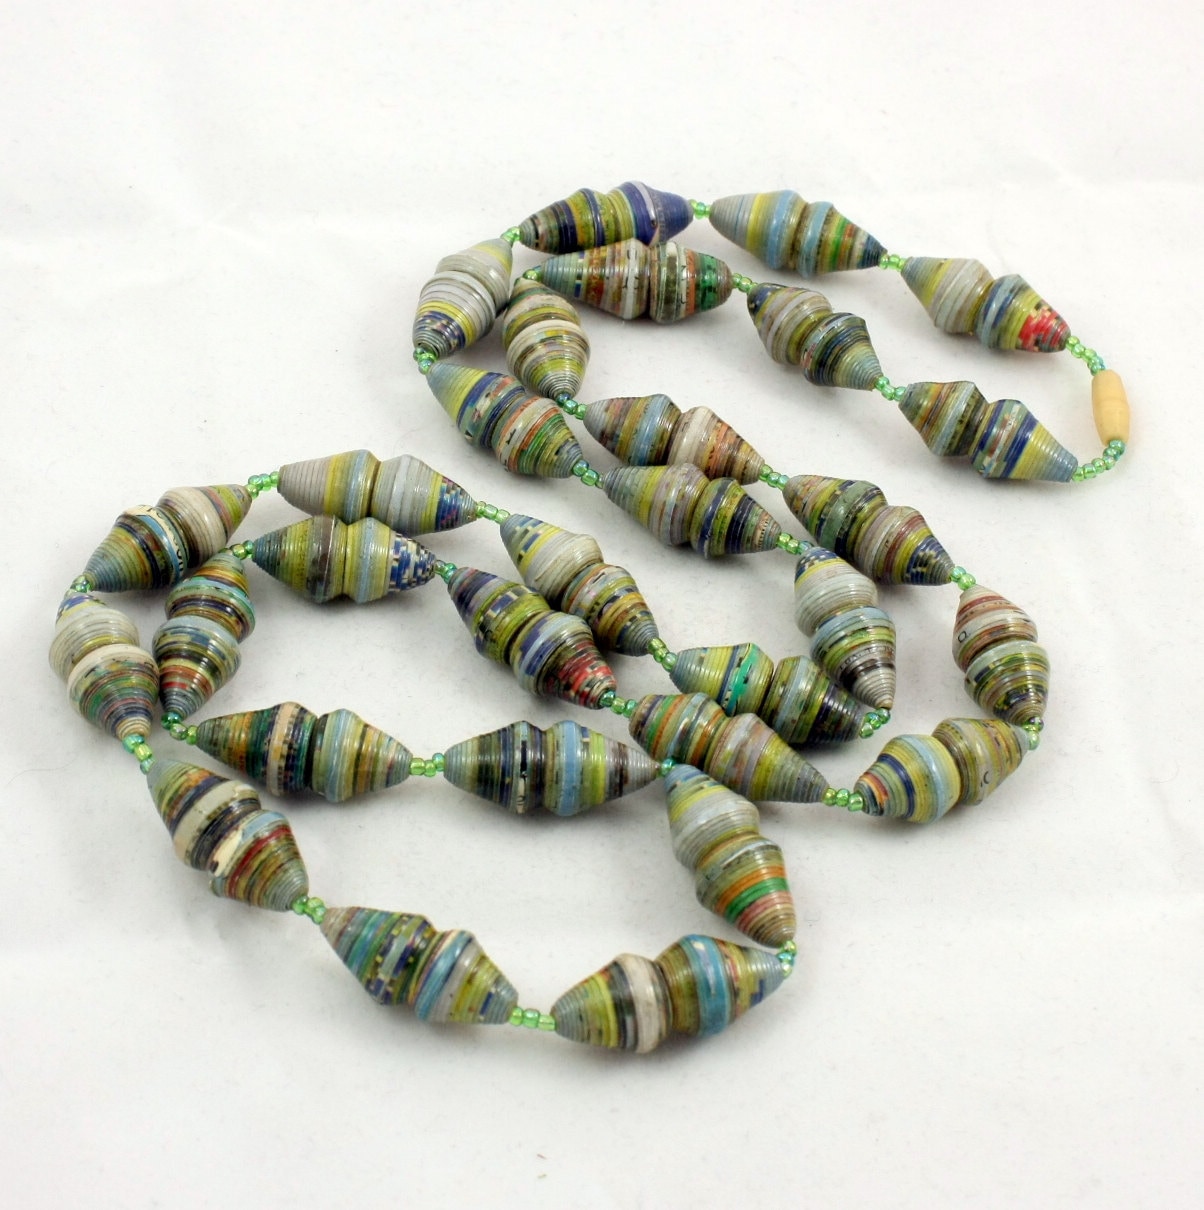 Vintage Rolled Paper Bead Necklace 36 Inch Long by mybooms on Etsy